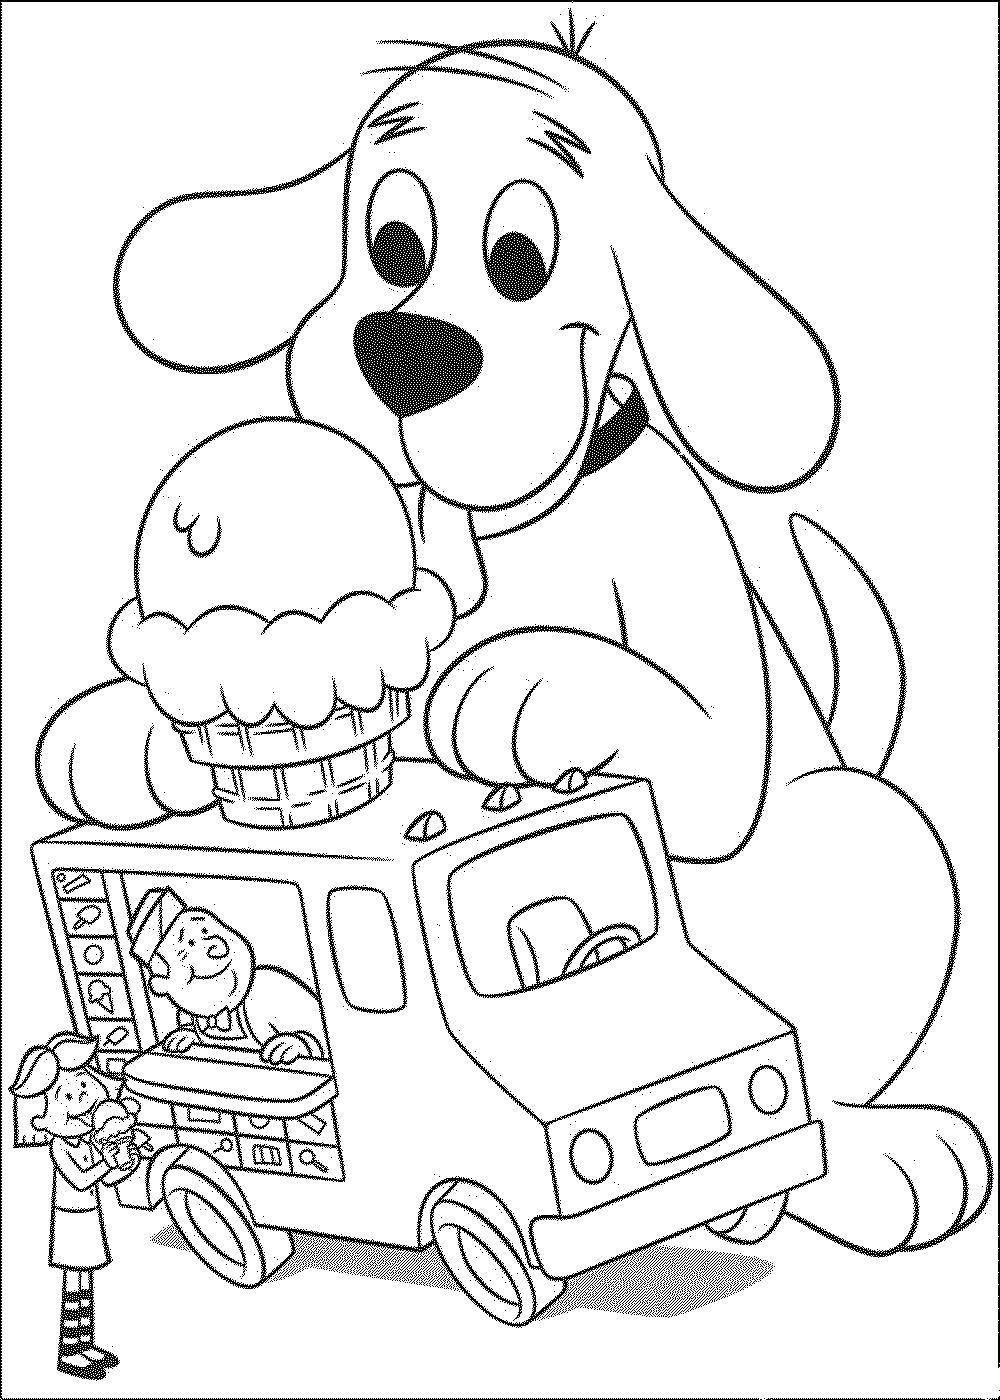 Coloring Dogs played with the machine morozhennogo. Category Pets allowed. Tags:  machine for ice cream.